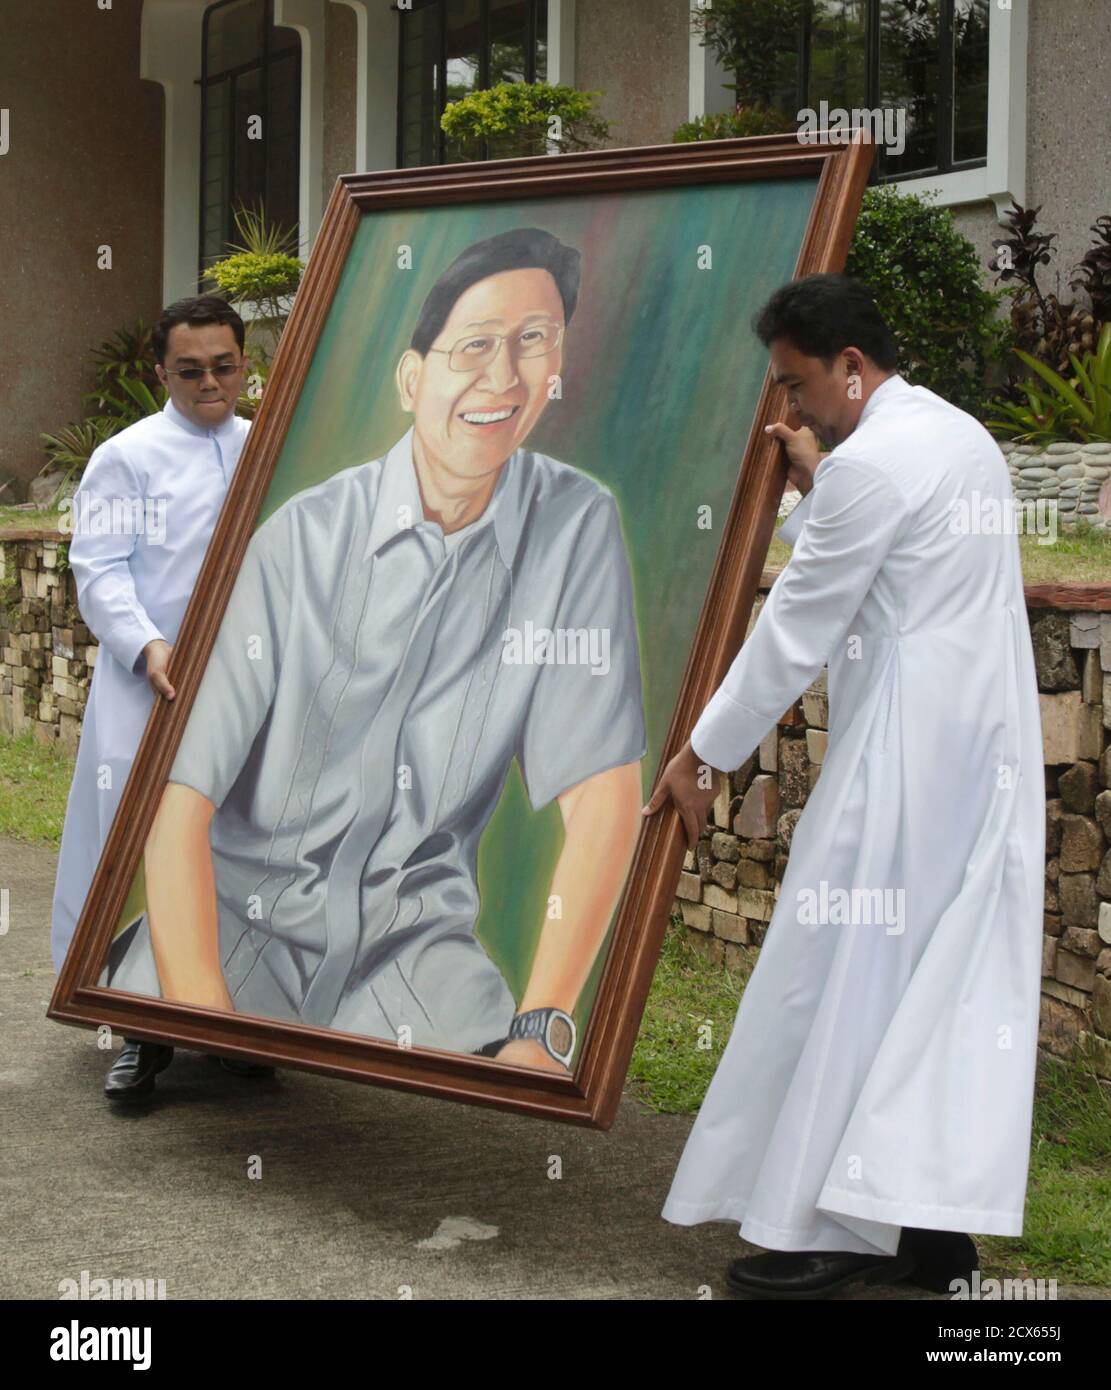 Seminarians of Tahanan ng Mabuting Pastol (Home of the Good Shepherd) carry a large portrait of Cardinal Luis Antonio Tagle outside their seminary in Tagaytay city, south of Manila February 27, 2013. The seminarians gave the portrait to Tagle who had been their rector for 11 years before being elected cardinal. Tagle, 55, who became a cardinal only in November 2012, is among those mentioned as a possible successor to Pope Benedict XVI after his resignation. Picture taken February 27, 2013. REUTERS/Erik De Castro  (PHILIPPINES - Tags: RELIGION POLITICS) Stock Photo